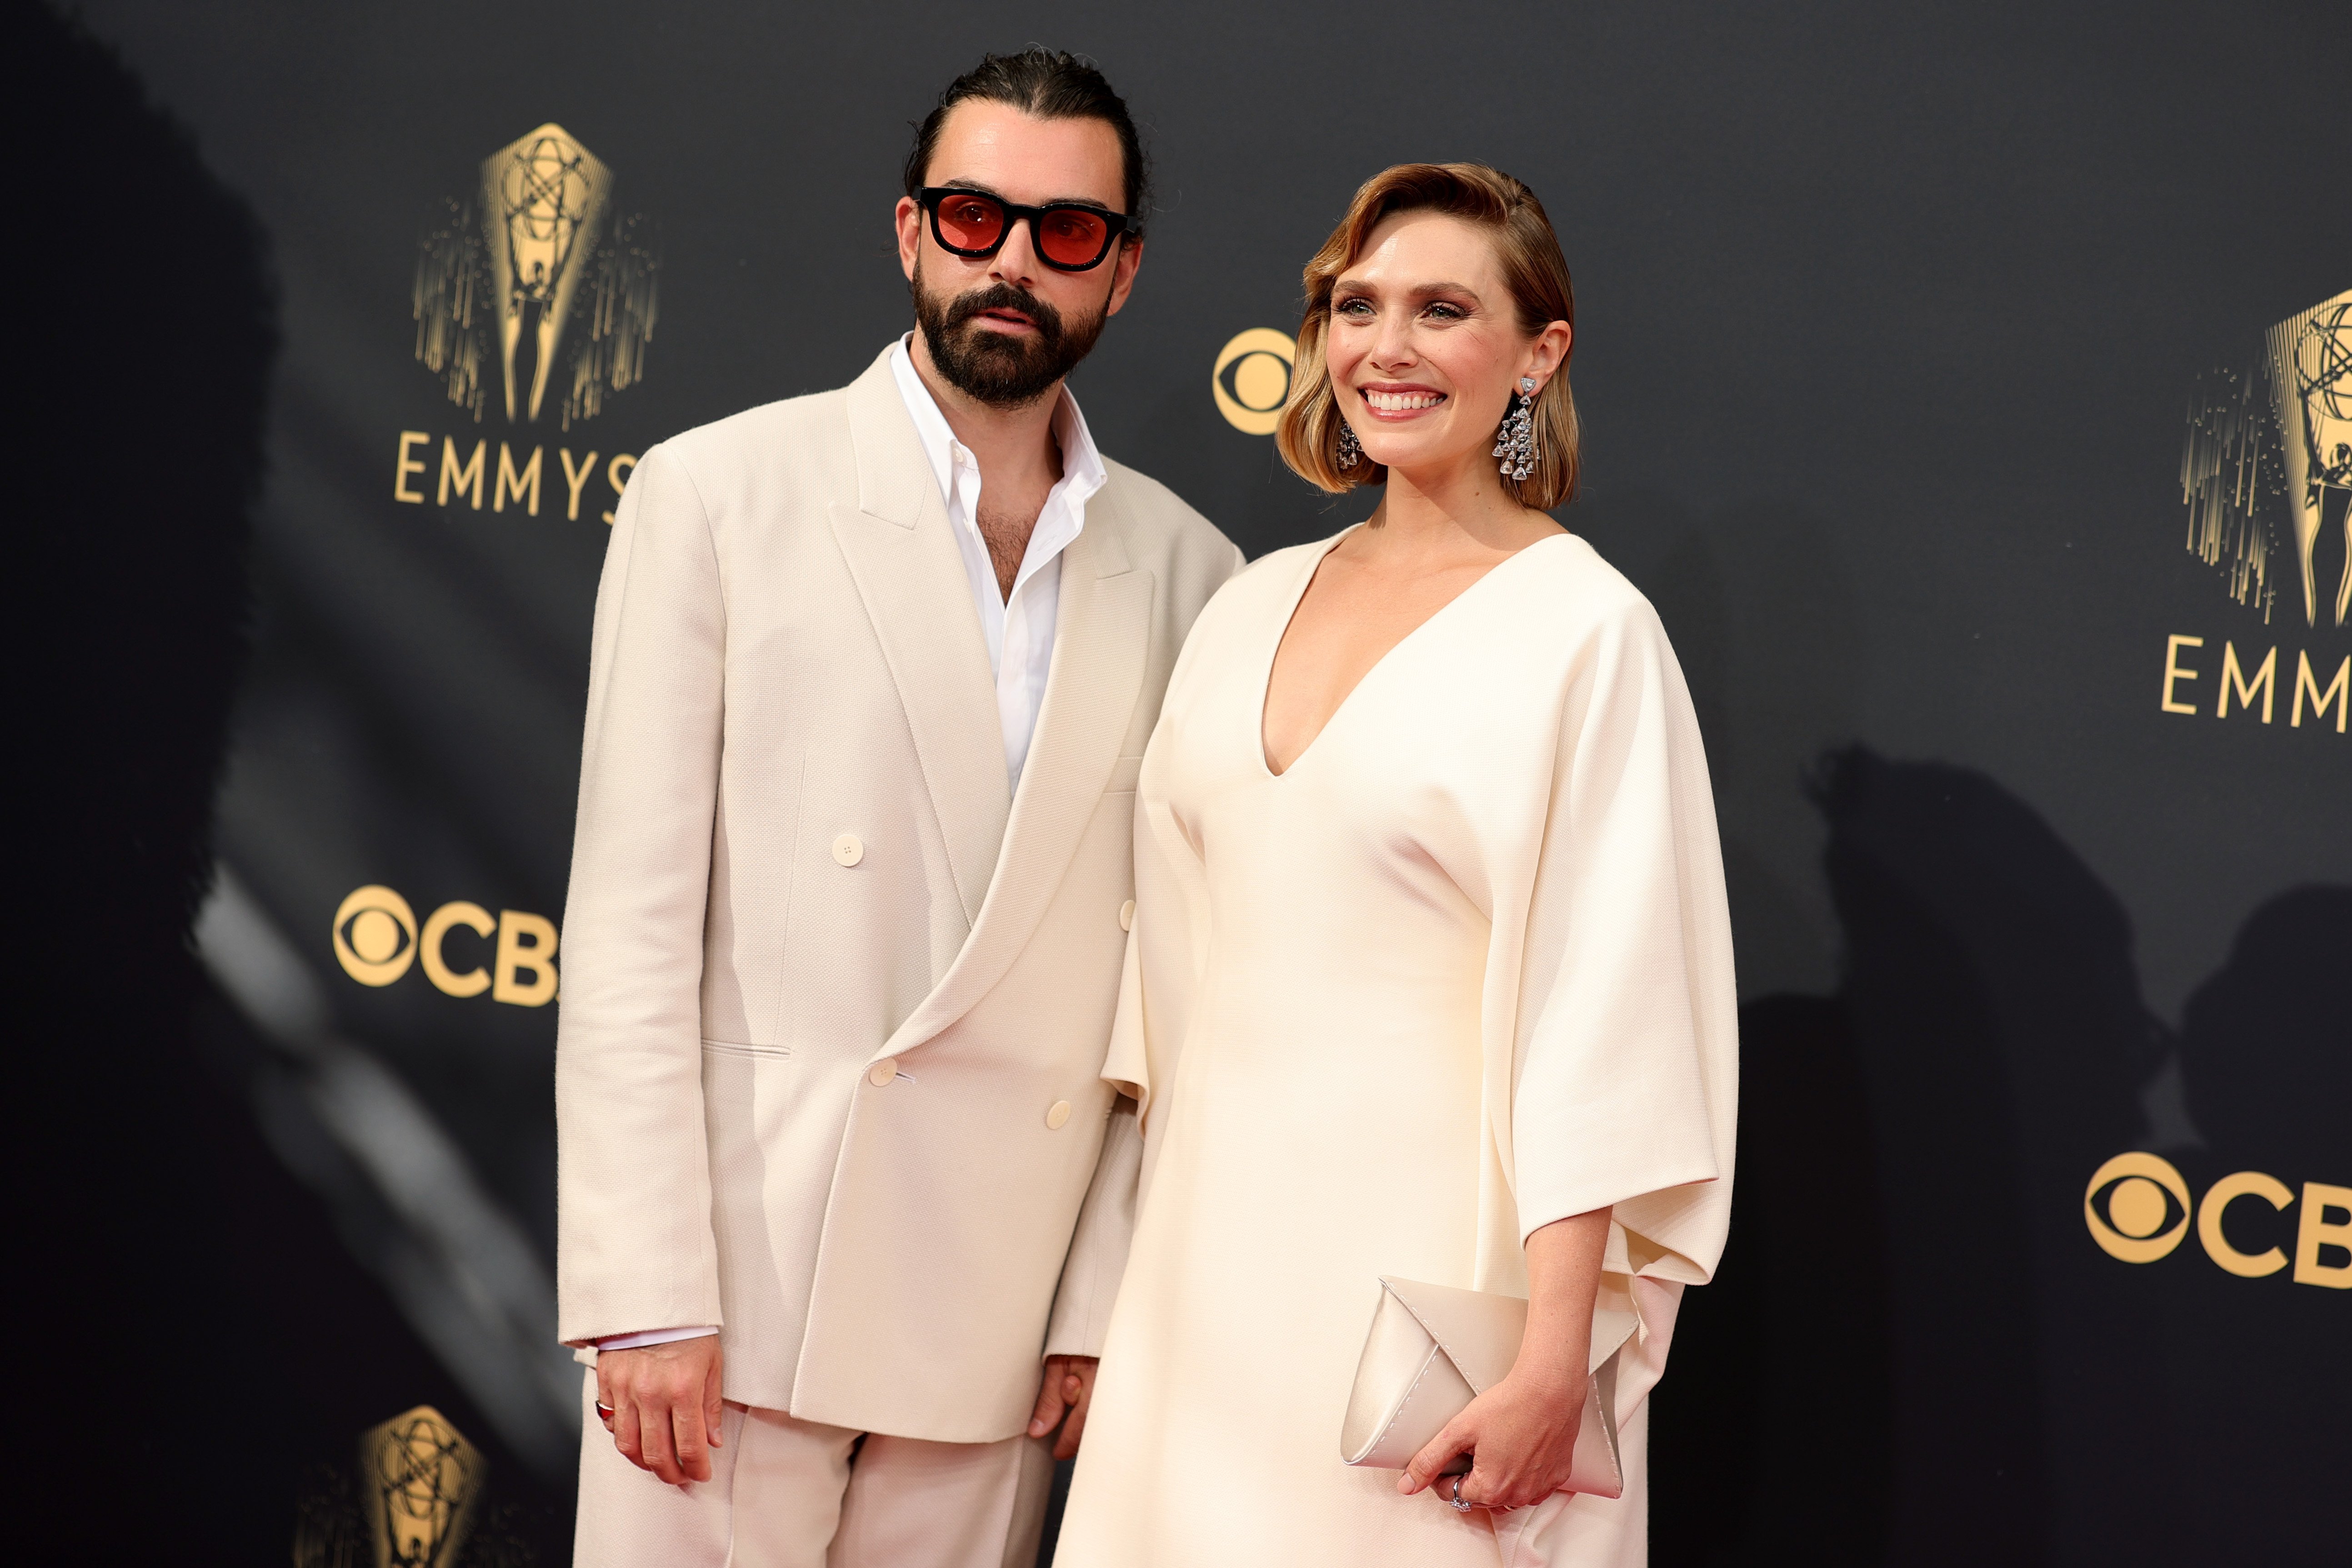 Robbie Arnett and Elizabeth Olsen at the 73rd Primetime Emmy Awards at L.A. LIVE on September 19, 2021 in Los Angeles, California. | Source: Getty Images